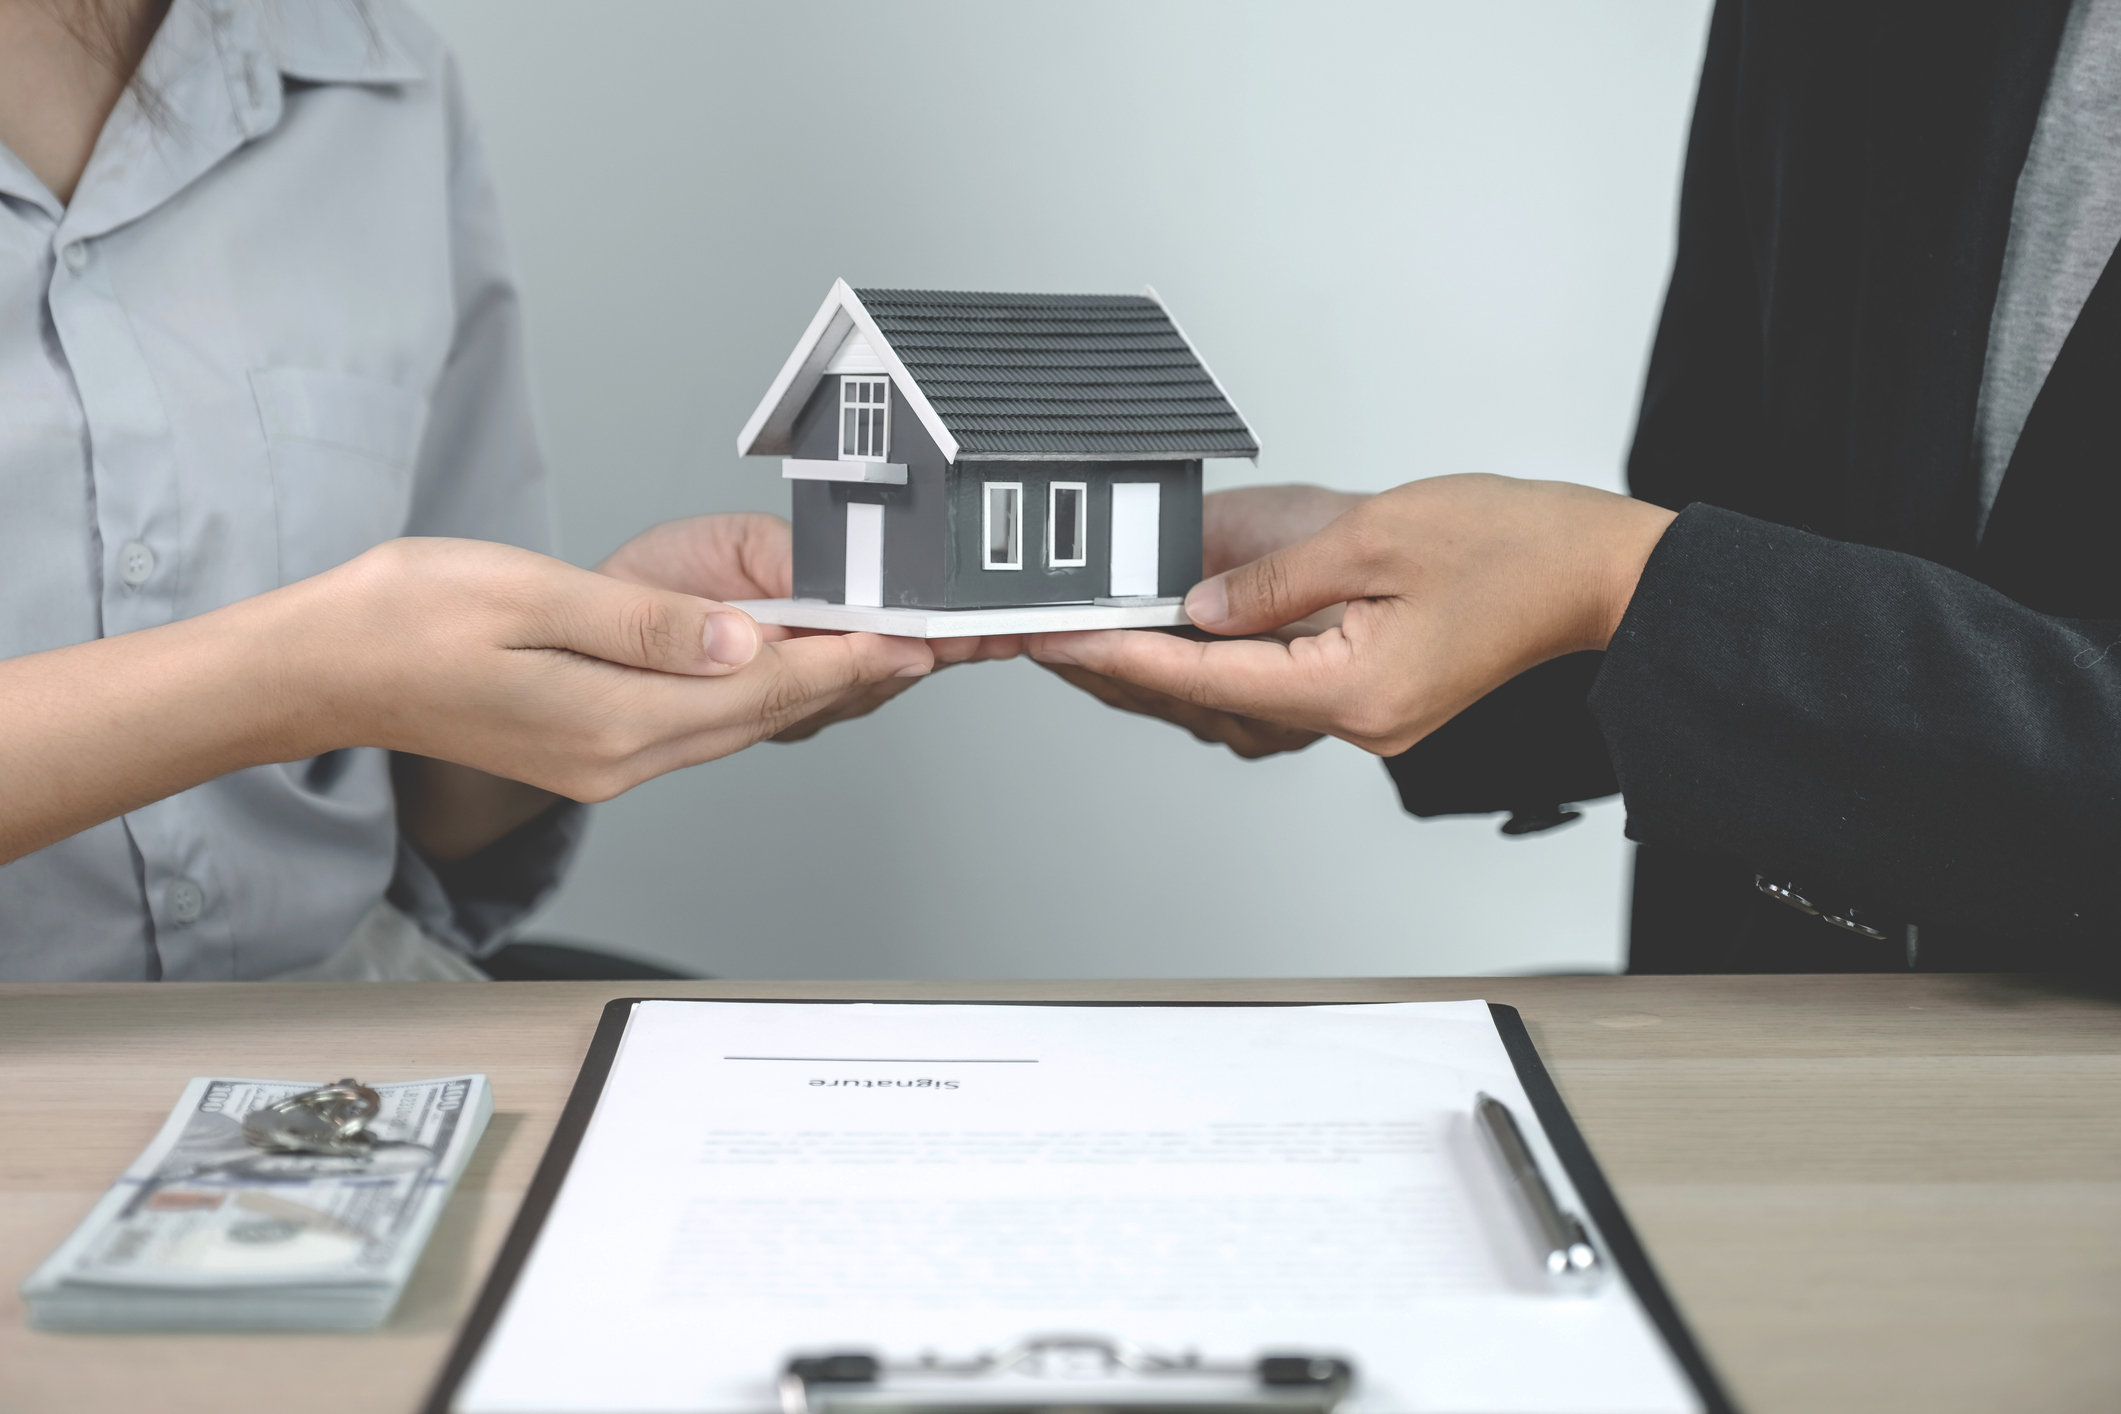 Hand a real estate agent, hold the home model, and explain the business contract, rent, buy, mortgage, loan, or home insurance to the buyer woman.